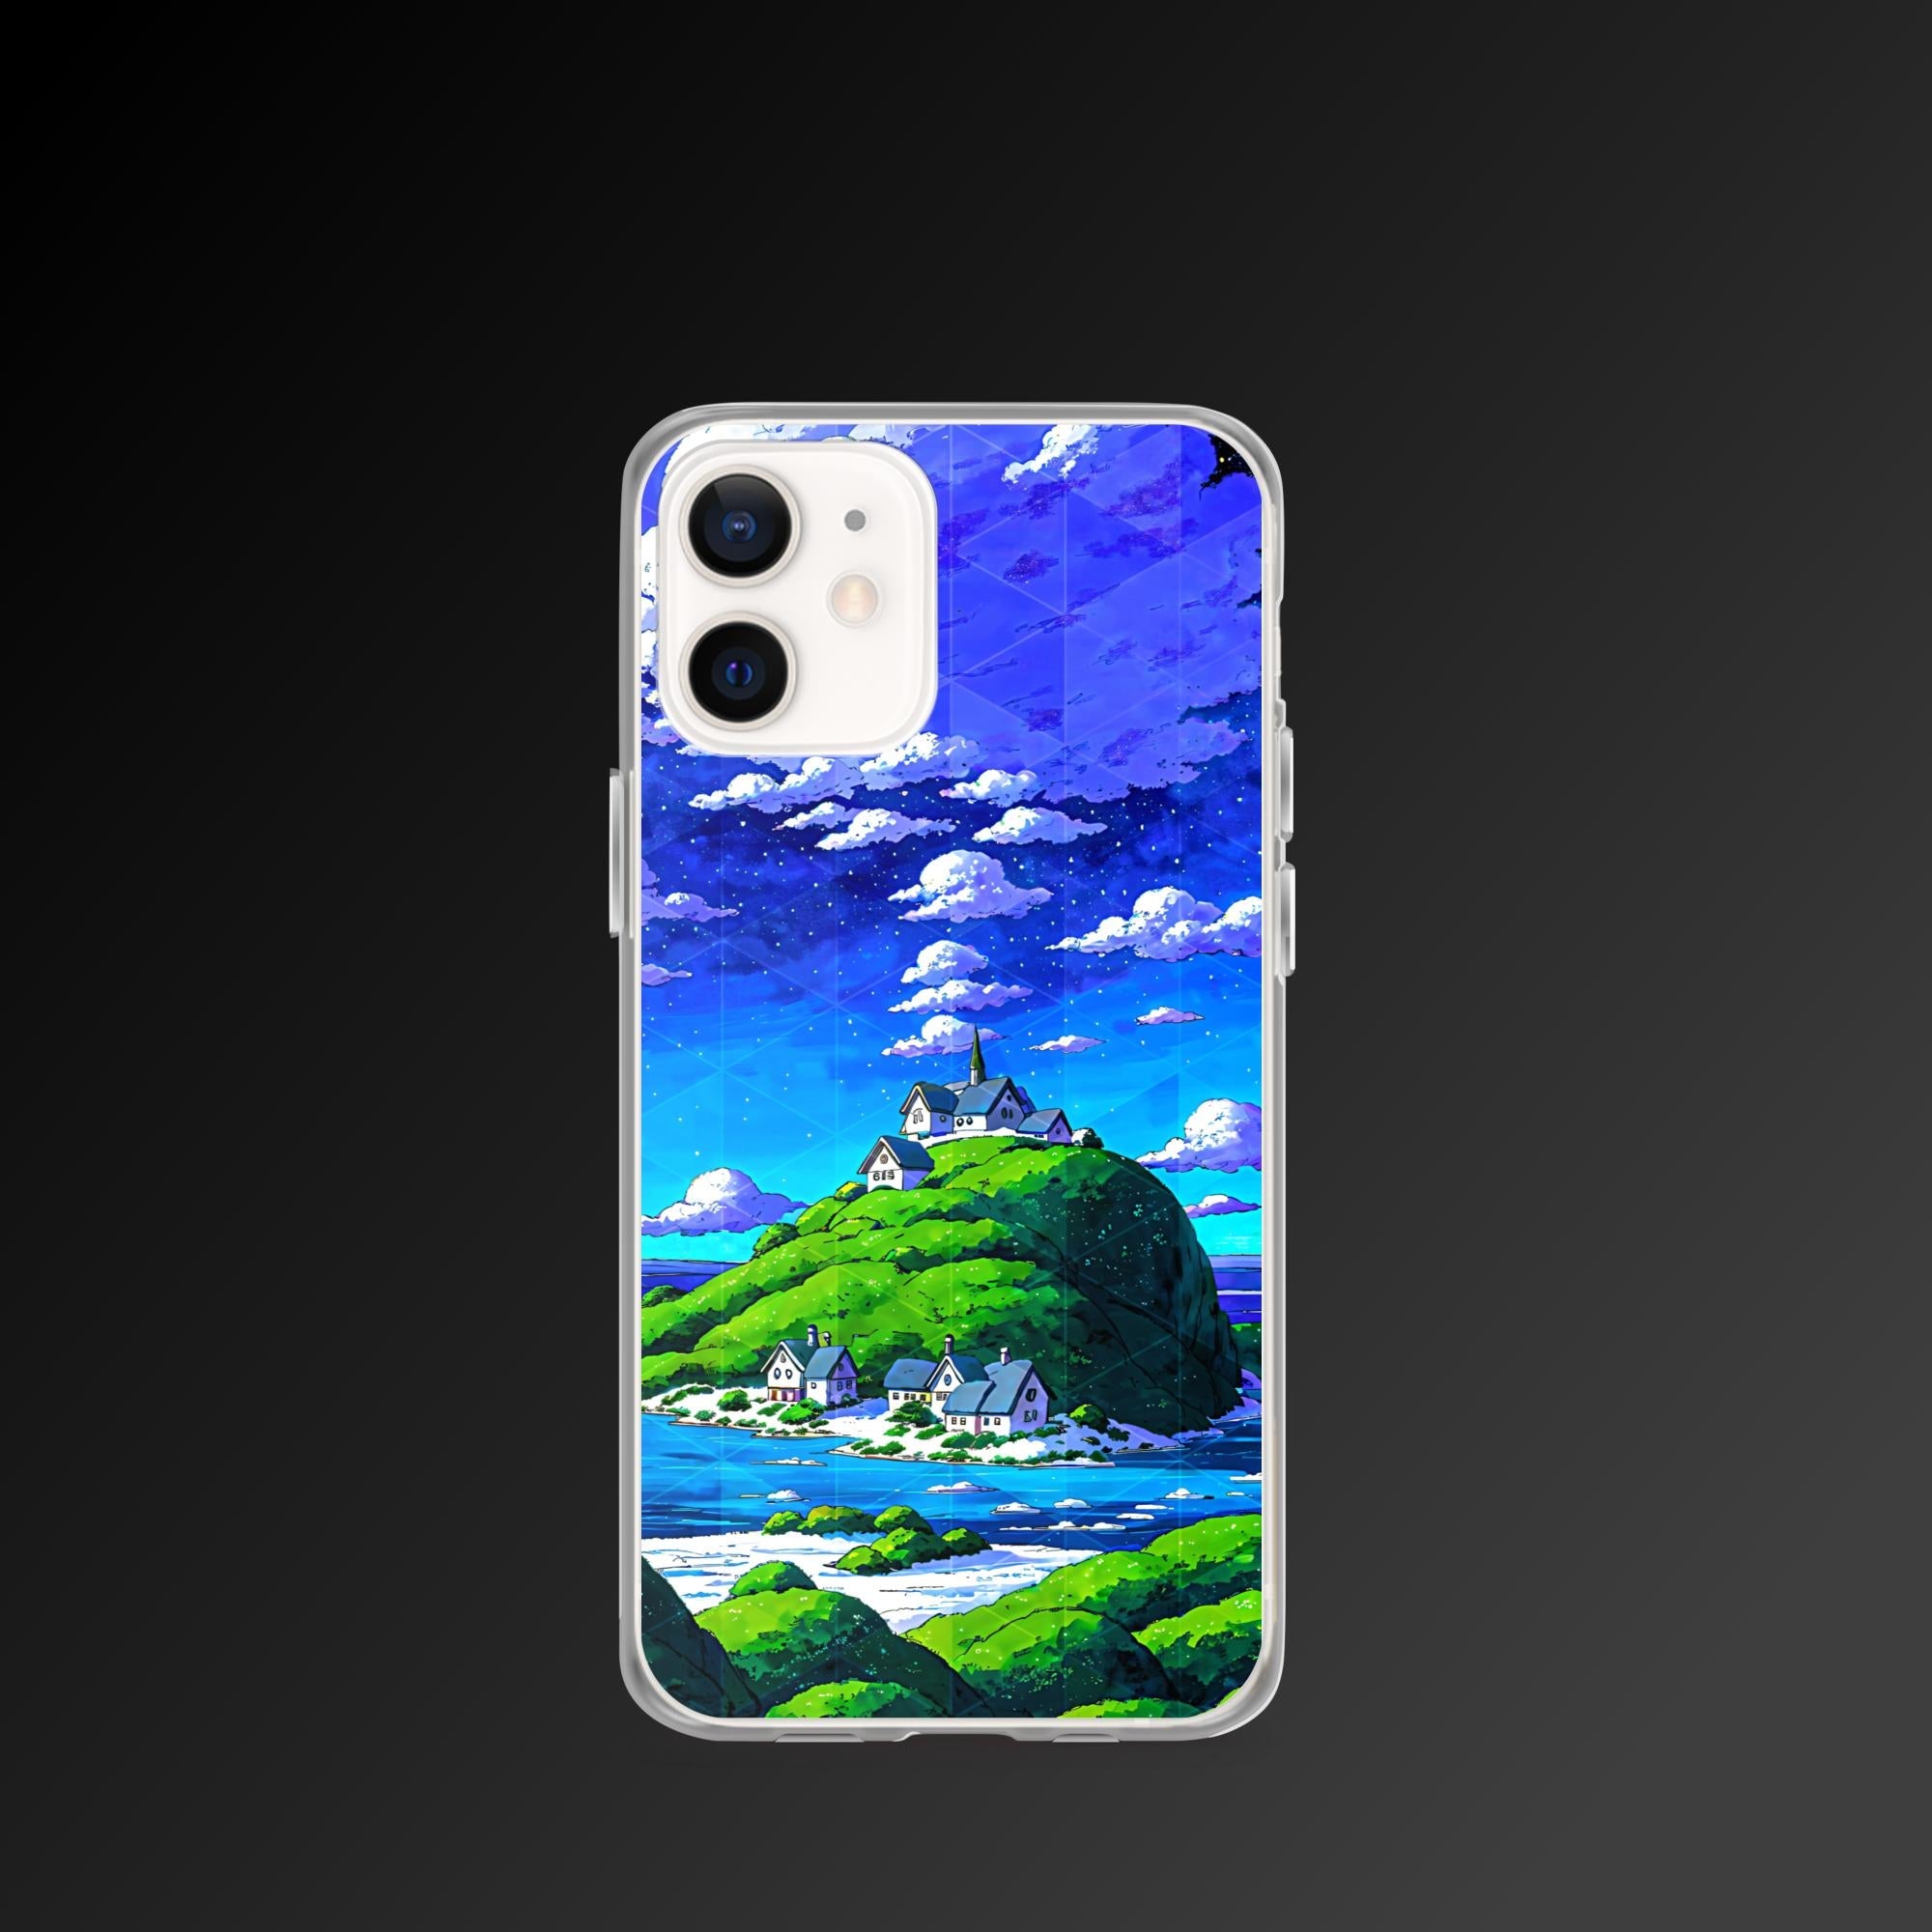 "Blissful world" clear iphone case - Clear iphone case - Ever colorful